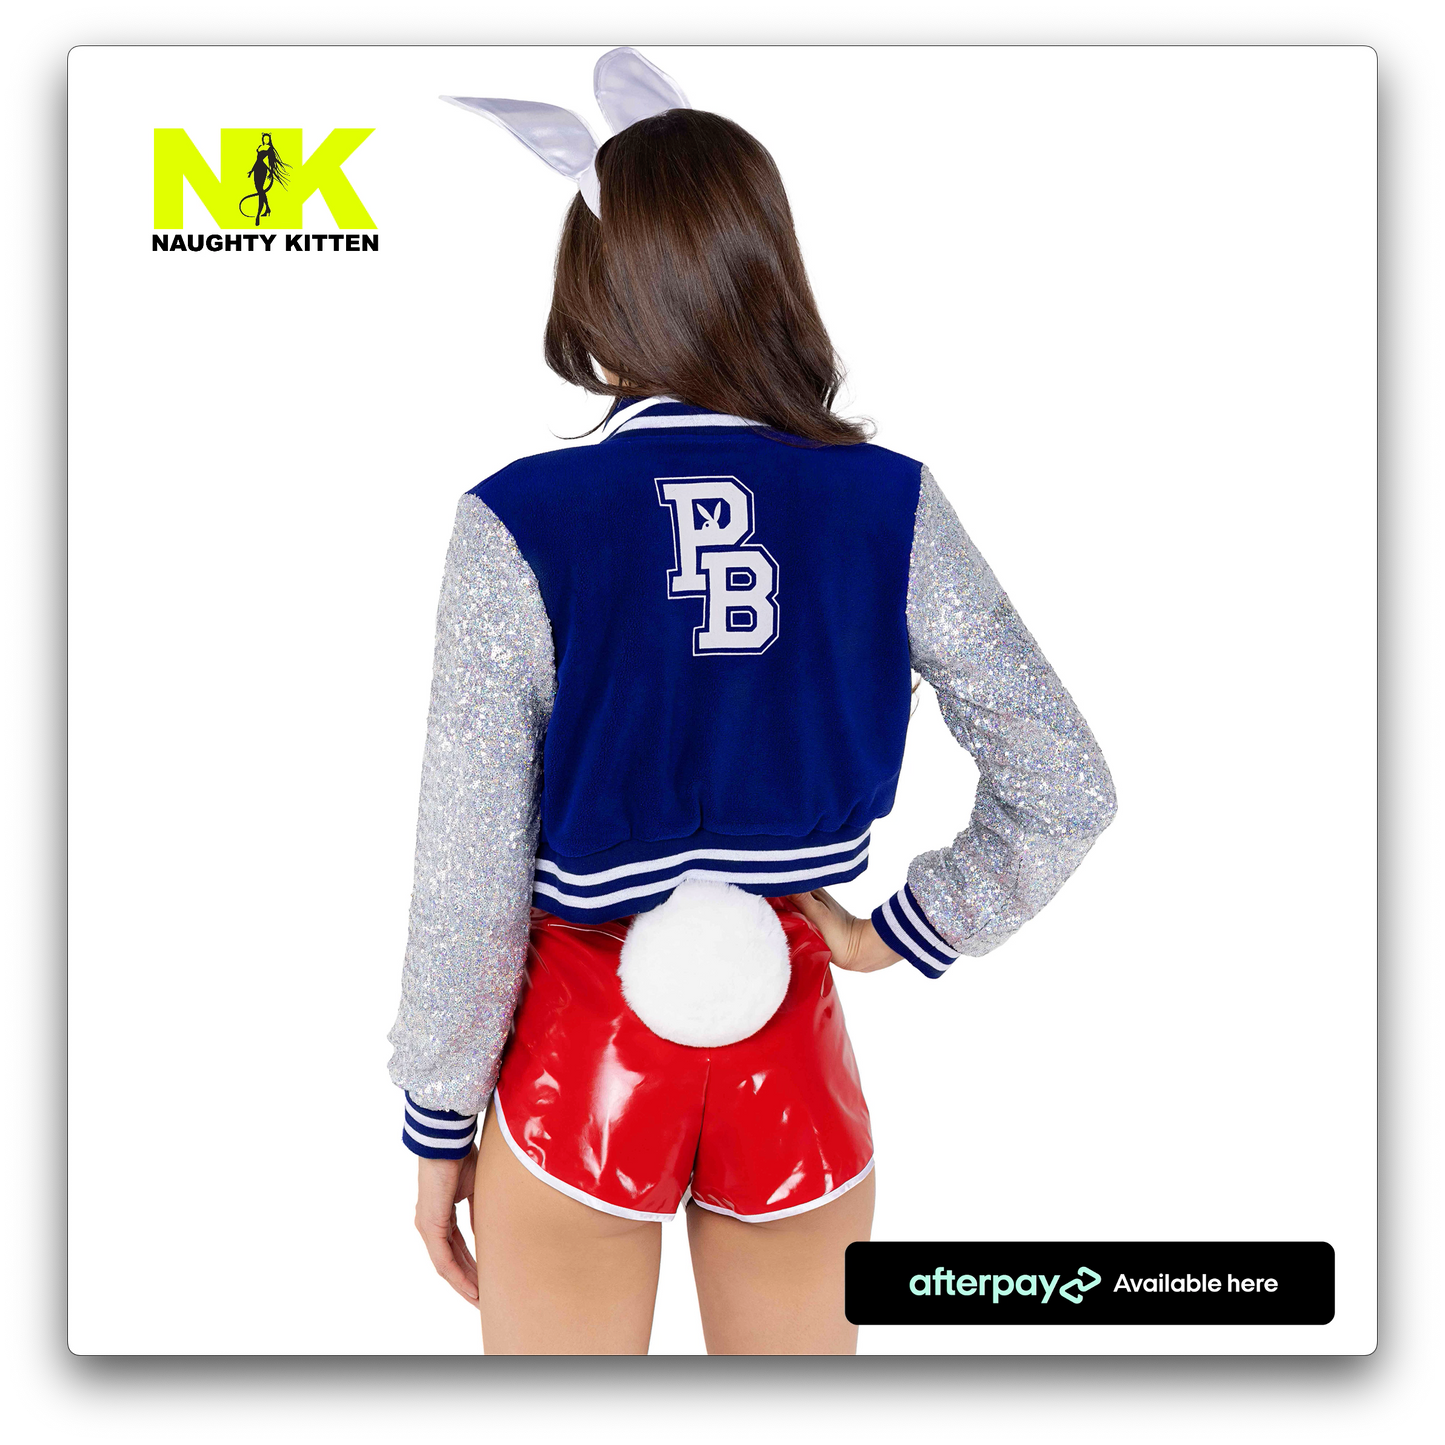 Naughty Kitten Clothing Playboy Athlete Costume Back rear View Playboy Costume